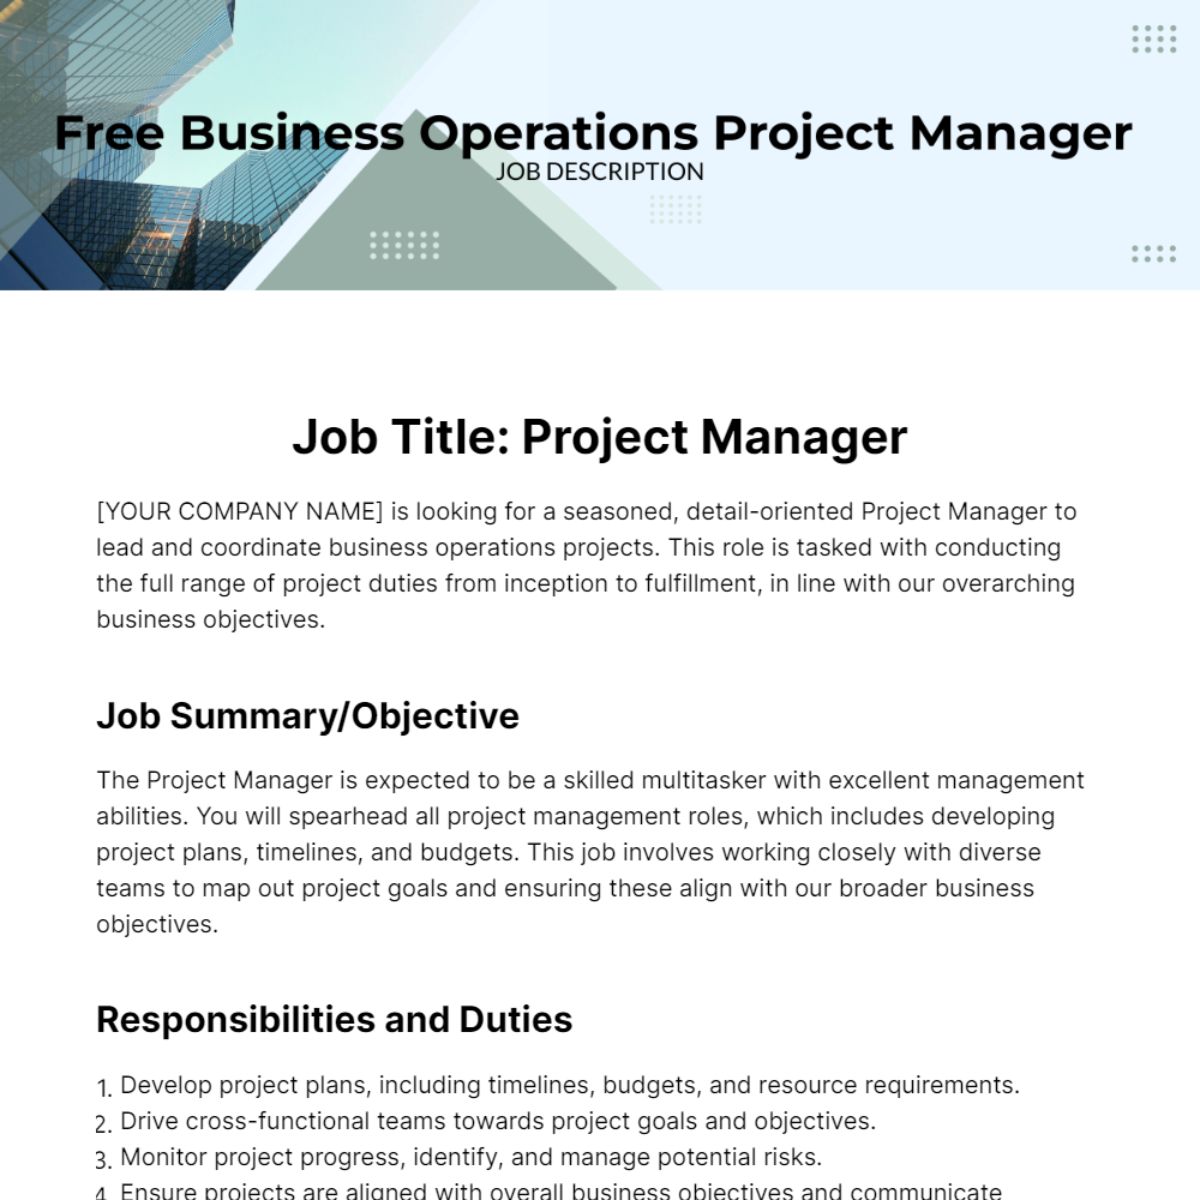 Free Business Operations Project Manager Job Description Template